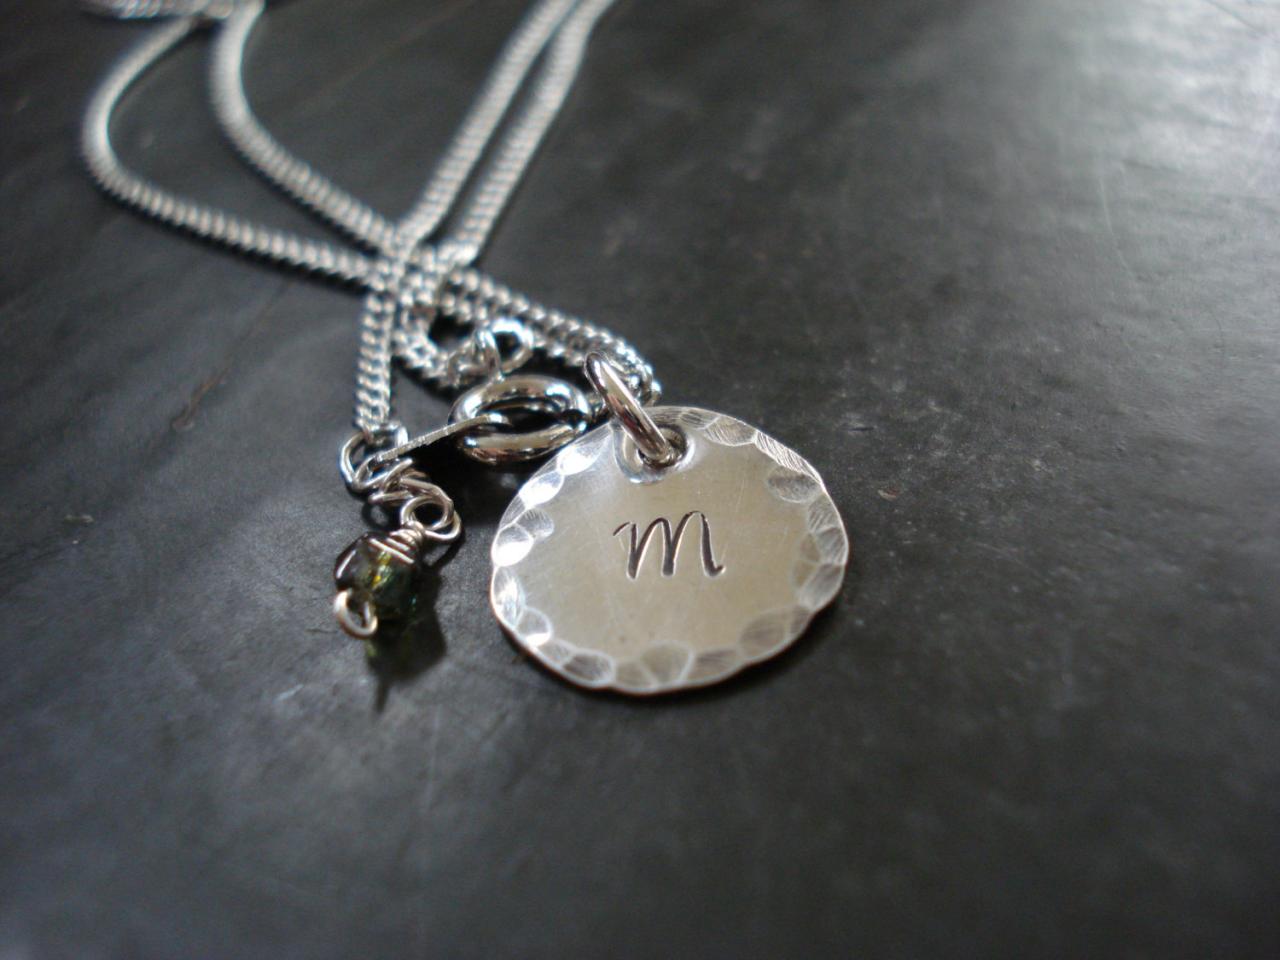 Initial Charm Necklace Made Of Sterling Silver, With A Czech Glass Charm.